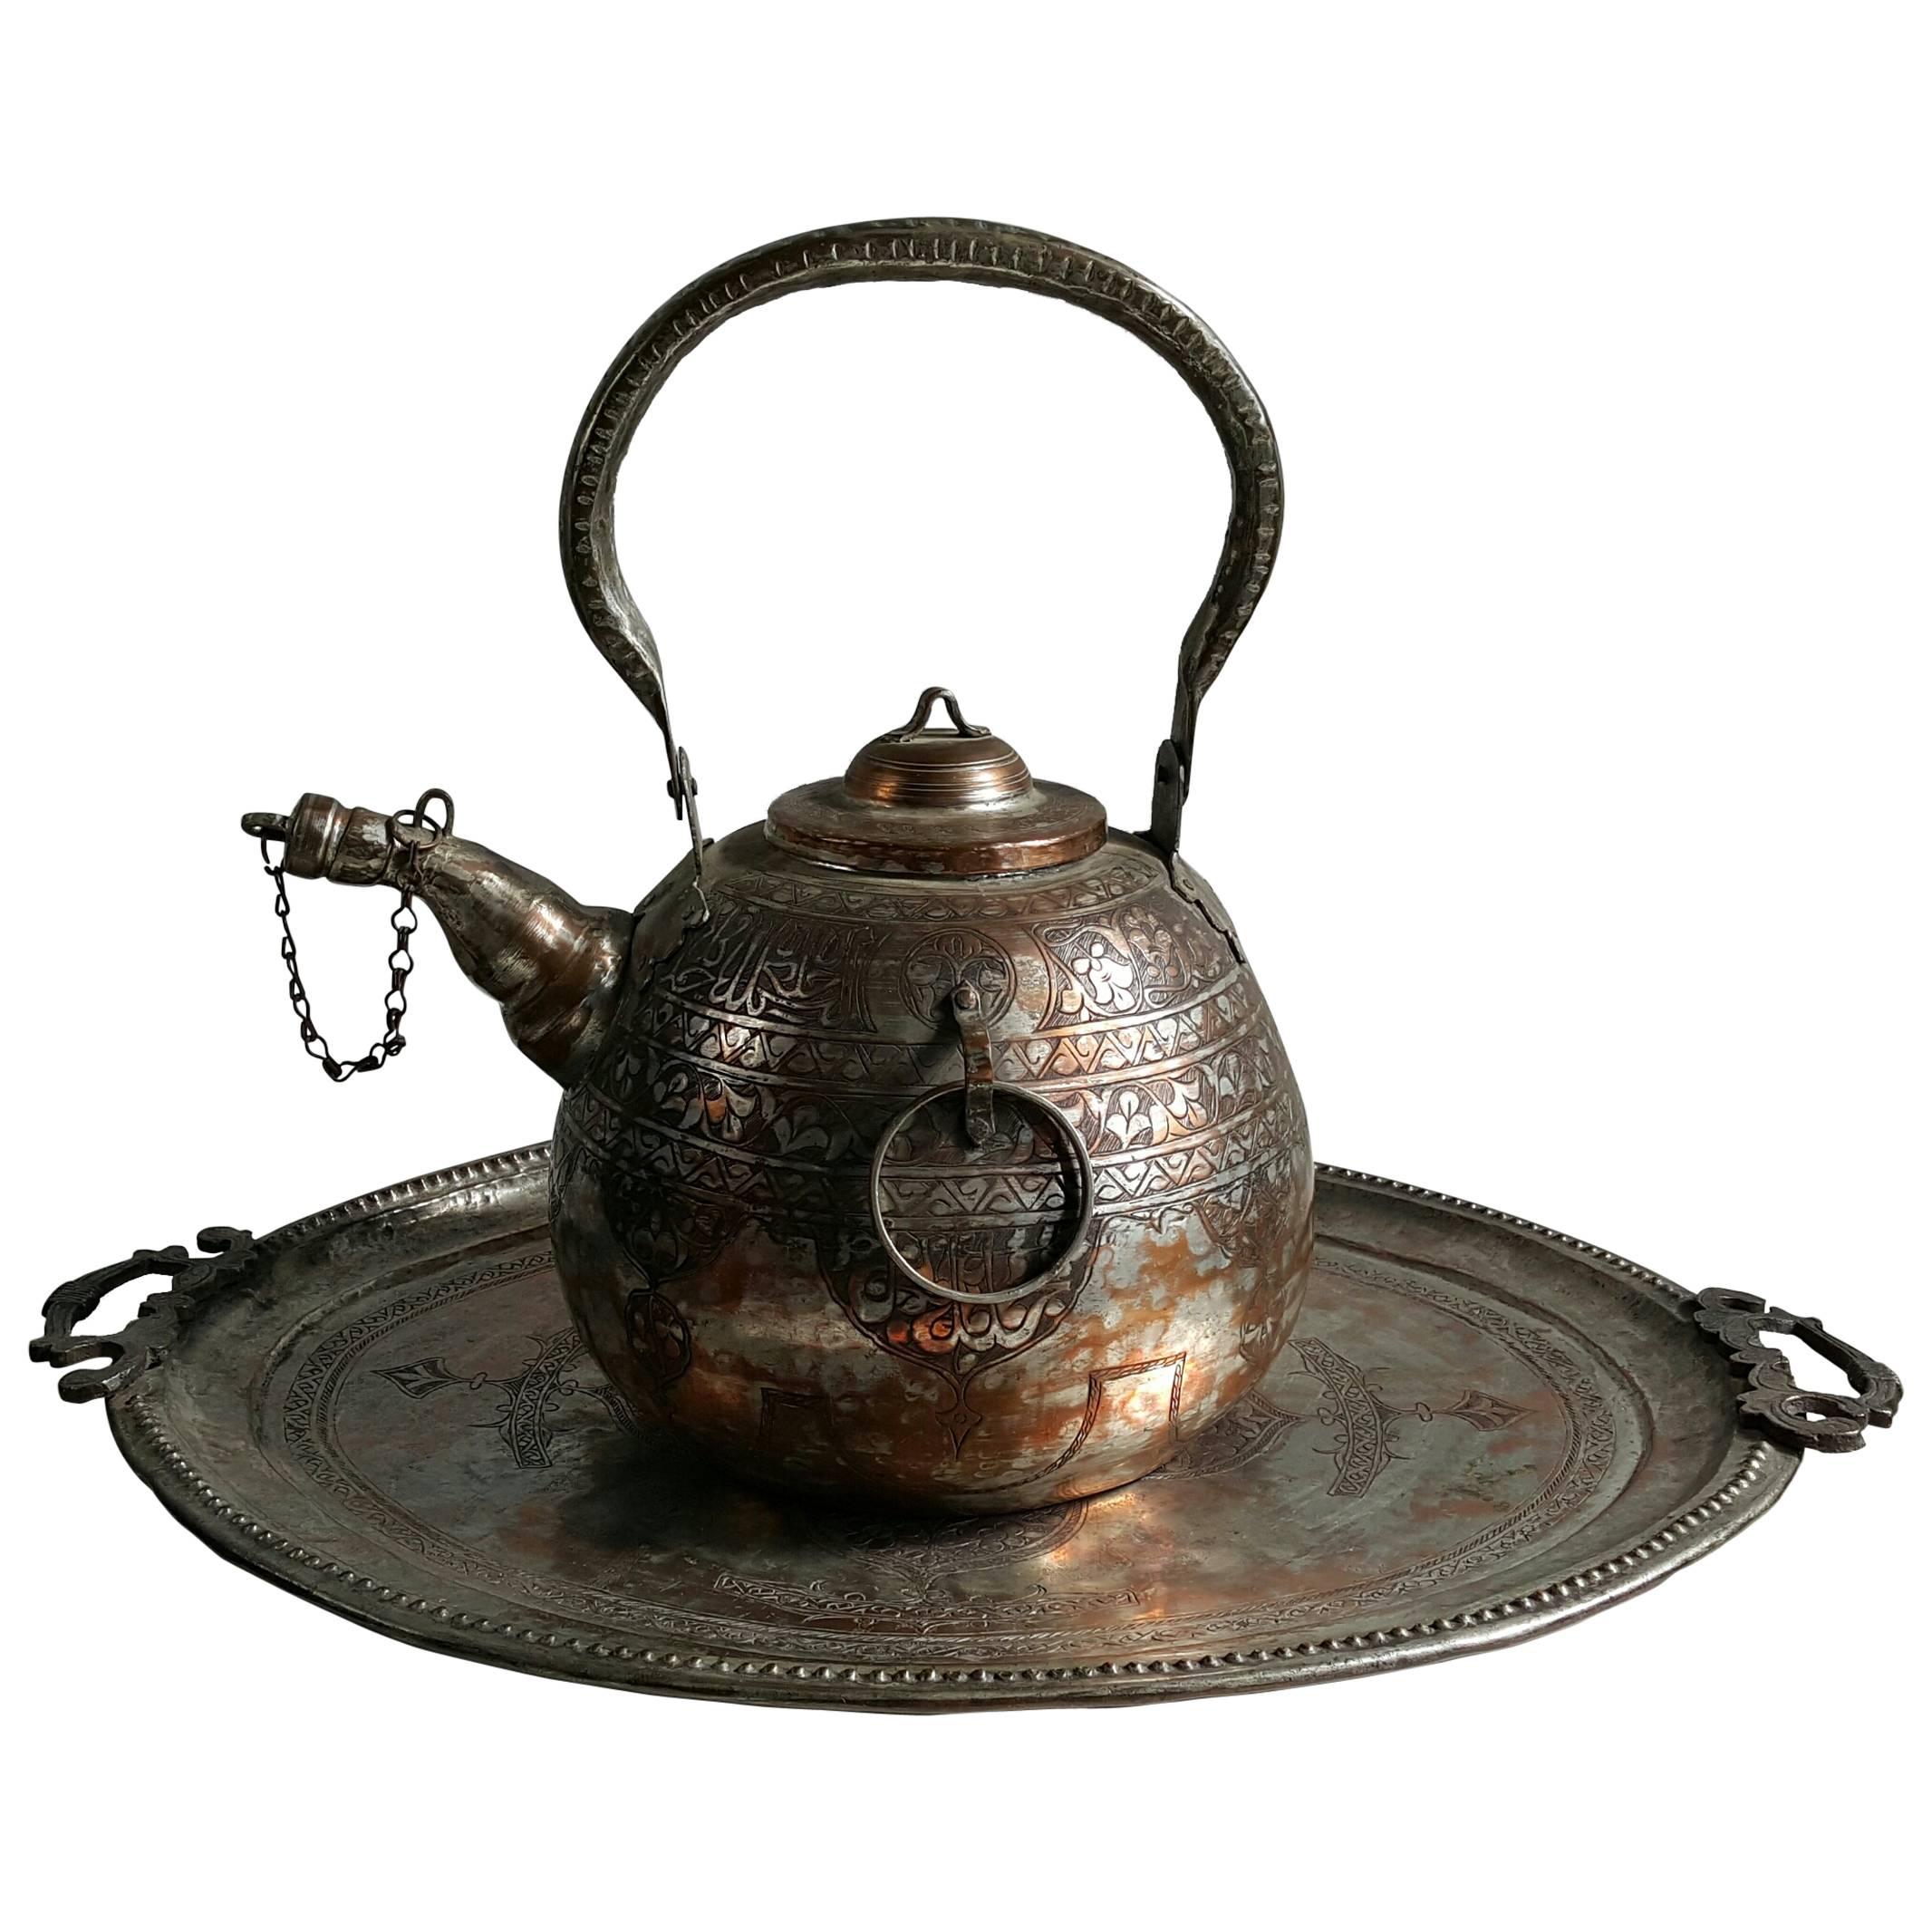 Monumental Antique Mid-Eastern Hammered and Engraved Kettle and Tray